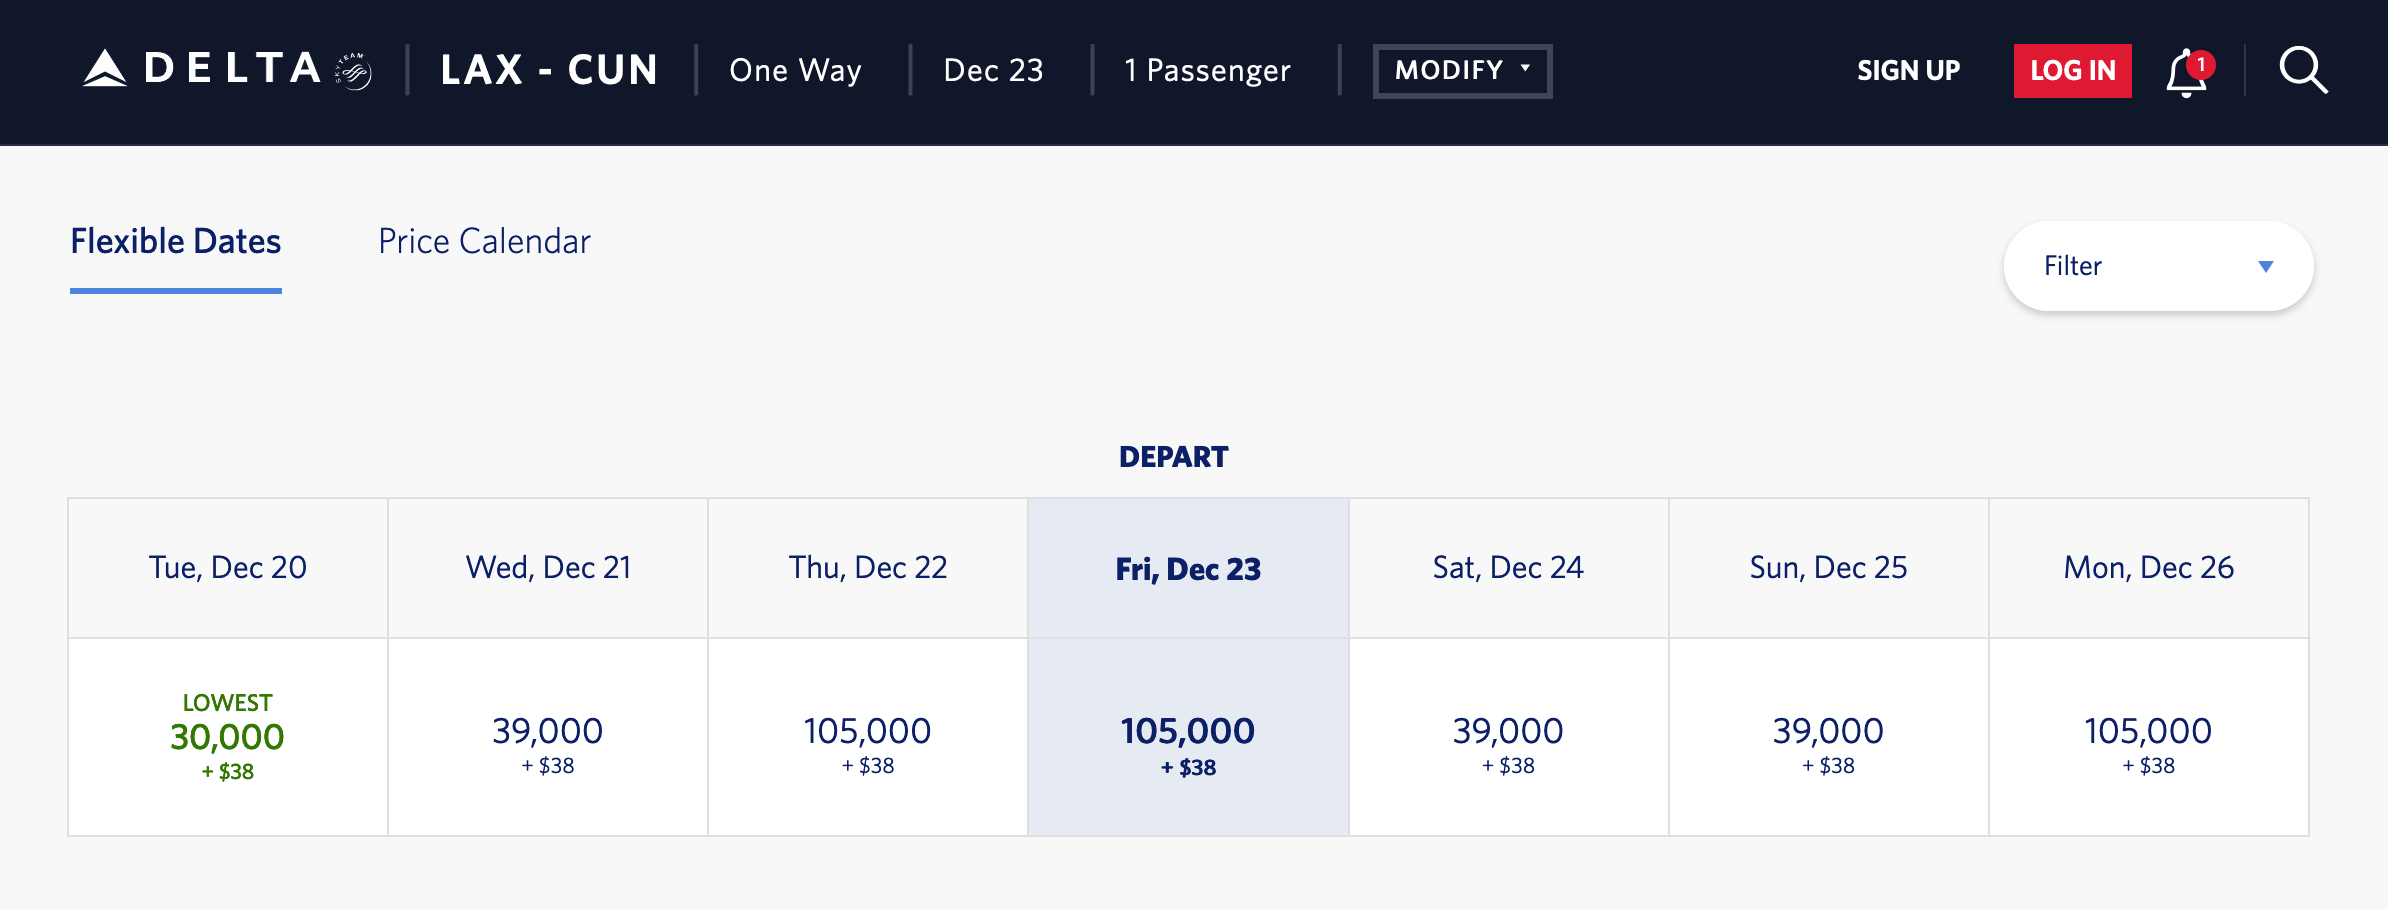 Delta award flight prices from Los Angeles to Cancun